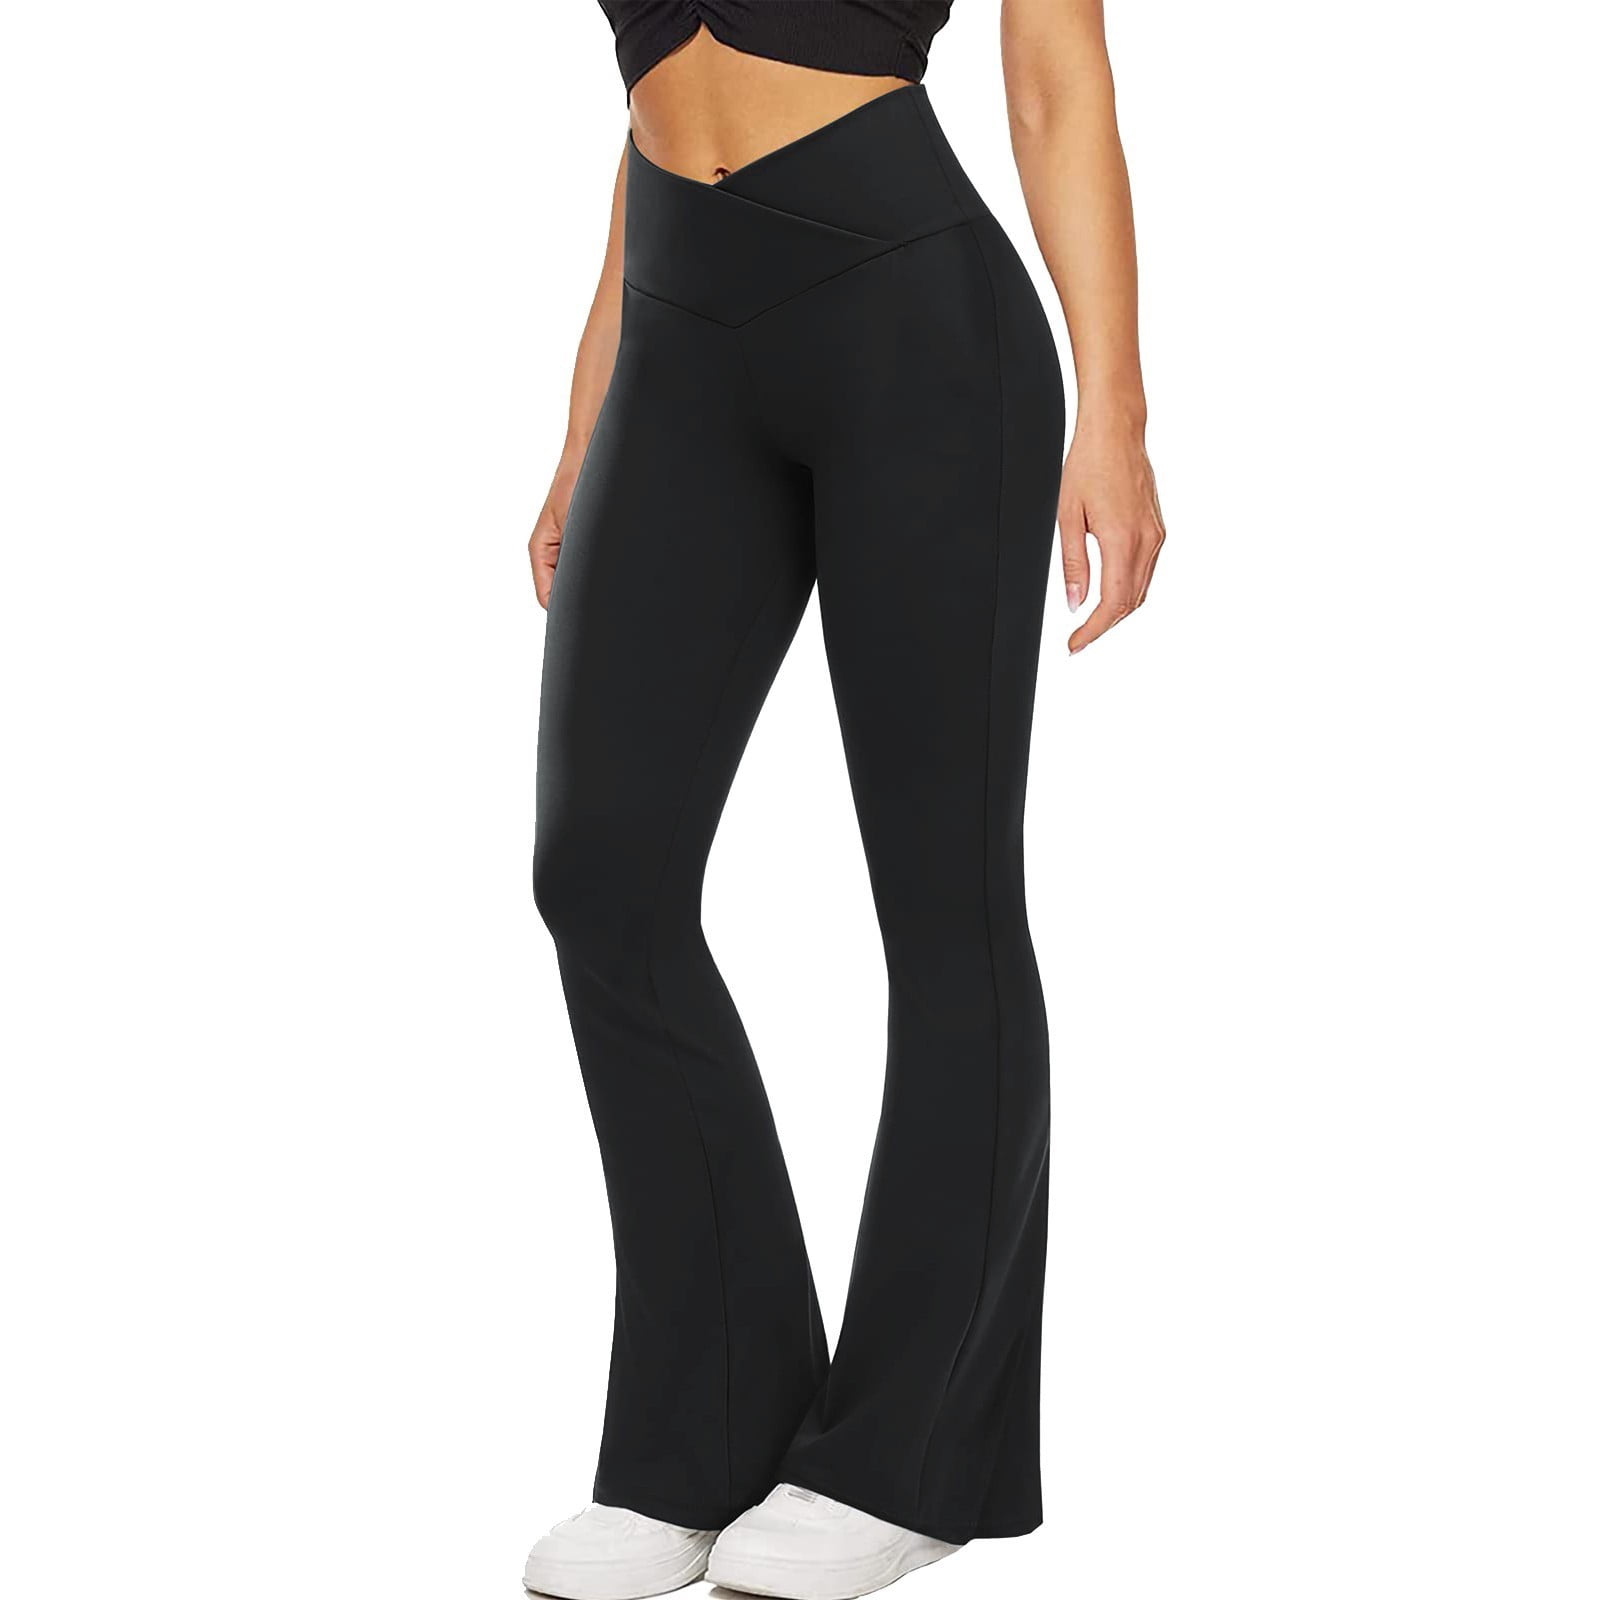 High Waisted Legging With Tummy Control, Terrible Fate